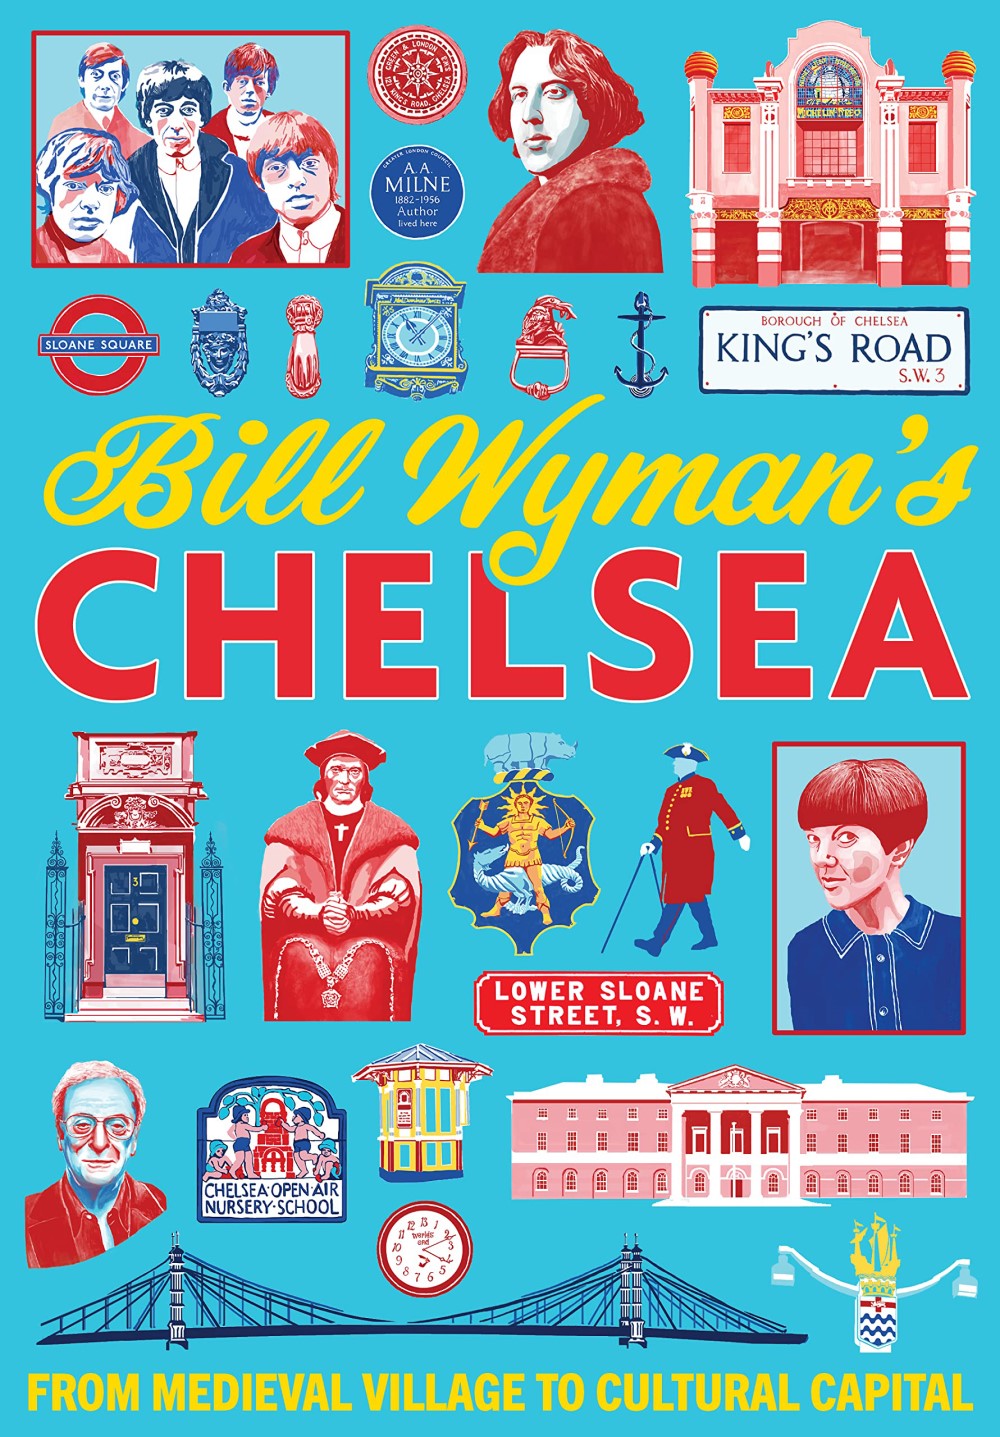 Cover of Bill Wyman's book on Chelsea